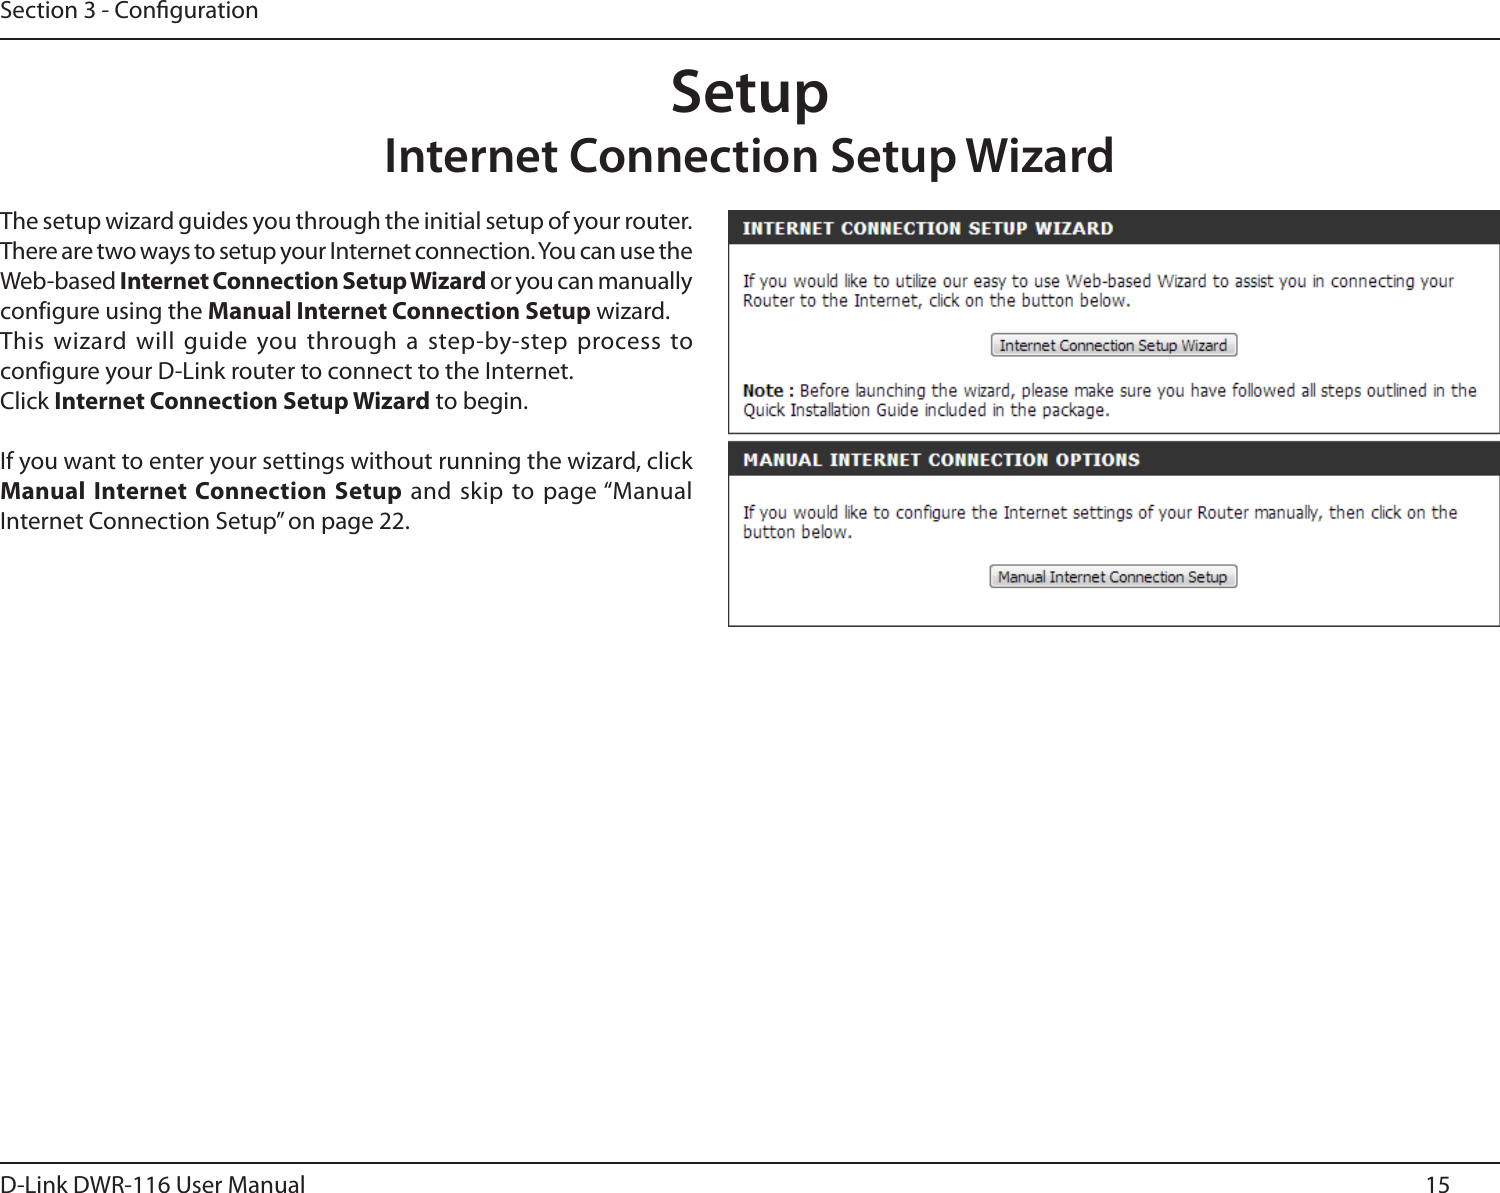 15D-Link DWR-116 User ManualSection 3 - CongurationSetupInternet Connection Setup WizardThe setup wizard guides you through the initial setup of your router. There are two ways to setup your Internet connection. You can use the Web-based Internet Connection Setup Wizard or you can manually configure using the Manual Internet Connection Setup wizard.This wizard will guide you through a step-by-step process to configure your D-Link router to connect to the Internet.Click Internet Connection Setup Wizard to begin.If you want to enter your settings without running the wizard, click Manual Internet Connection Setup  and skip to page “Manual Internet Connection Setup” on page 22.